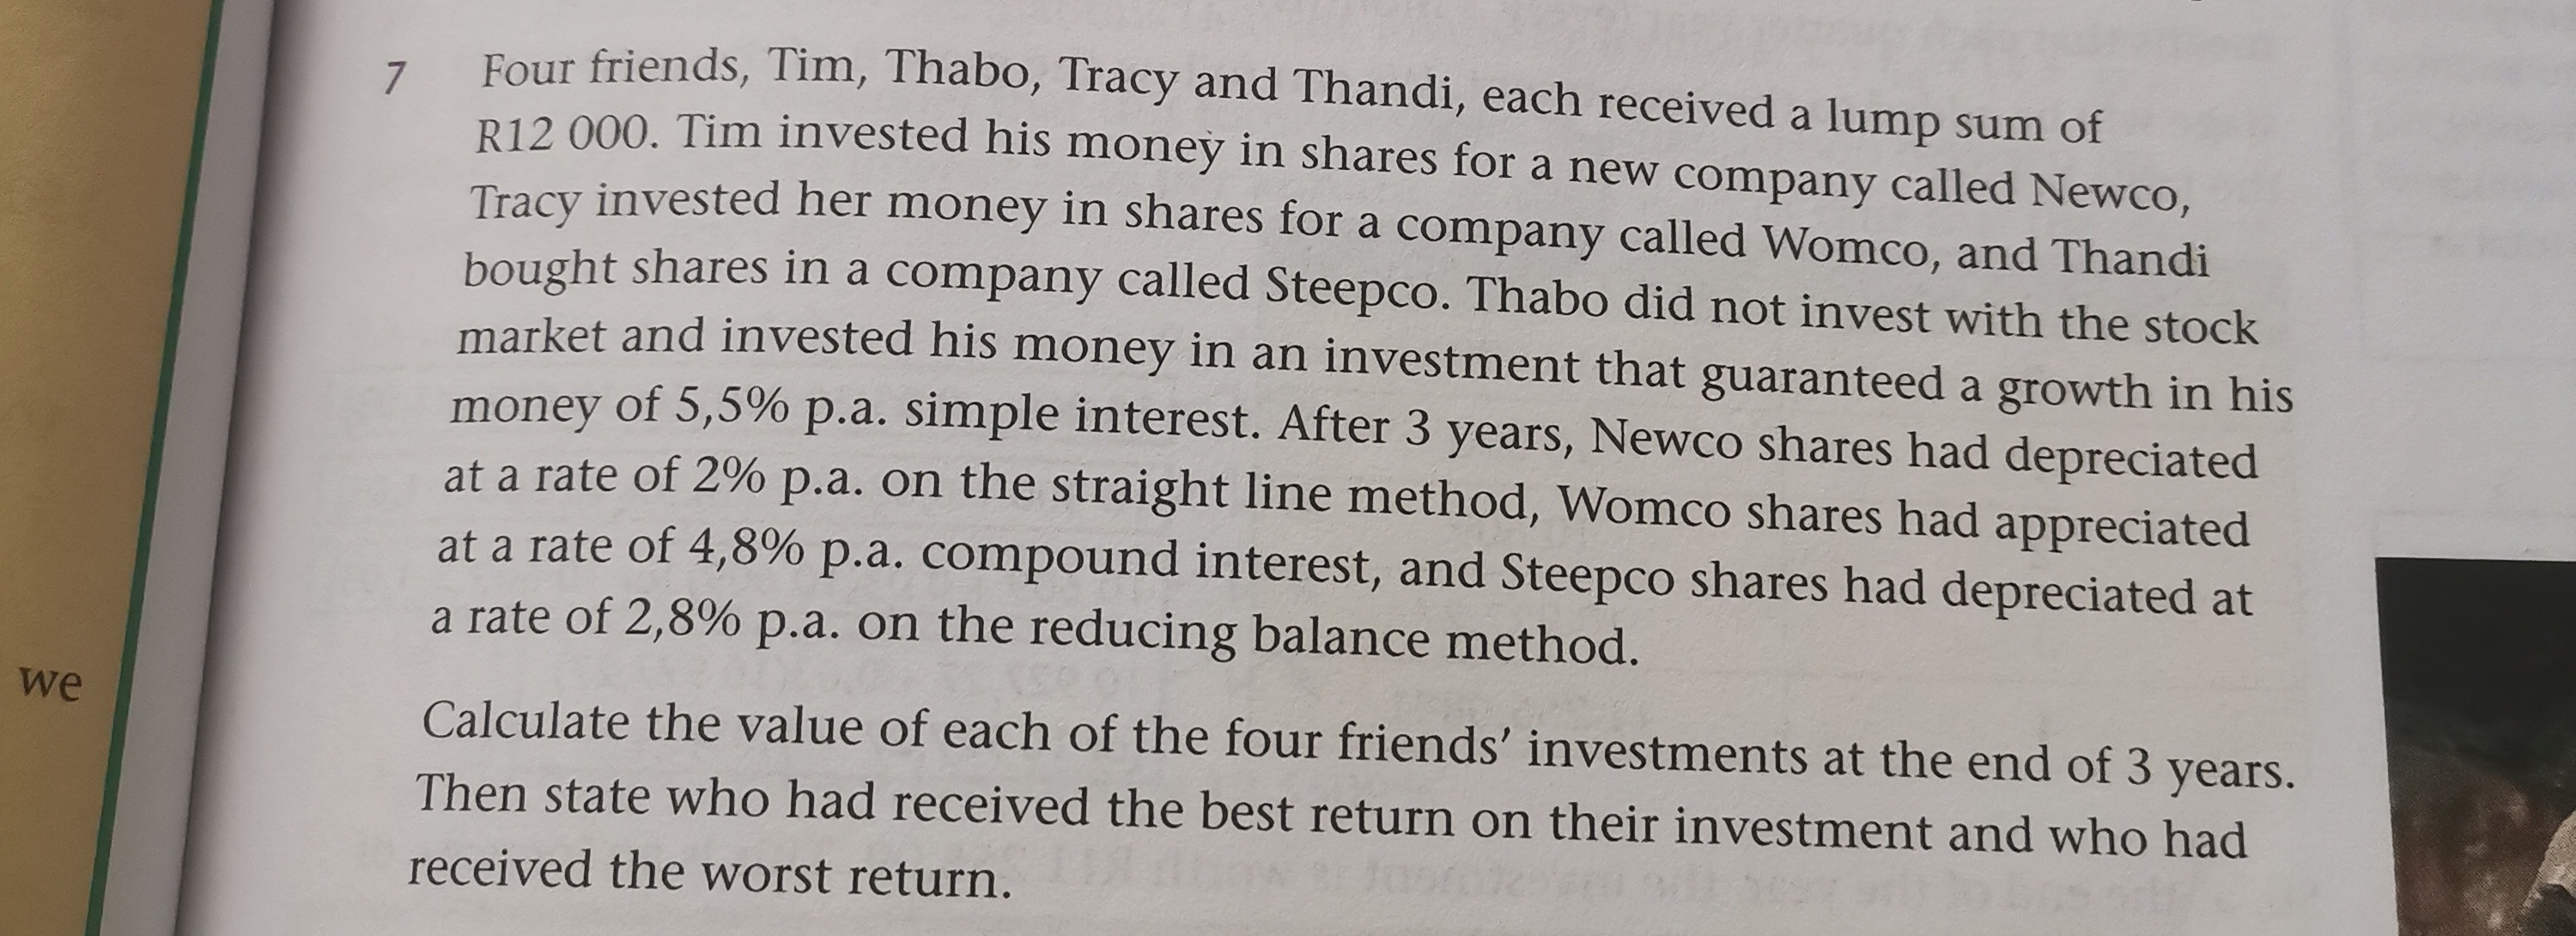 we 7 Four friends, Tim, Thabo, Tracy and Thandi, each received a lump sum of R12 000. Tim invested his money